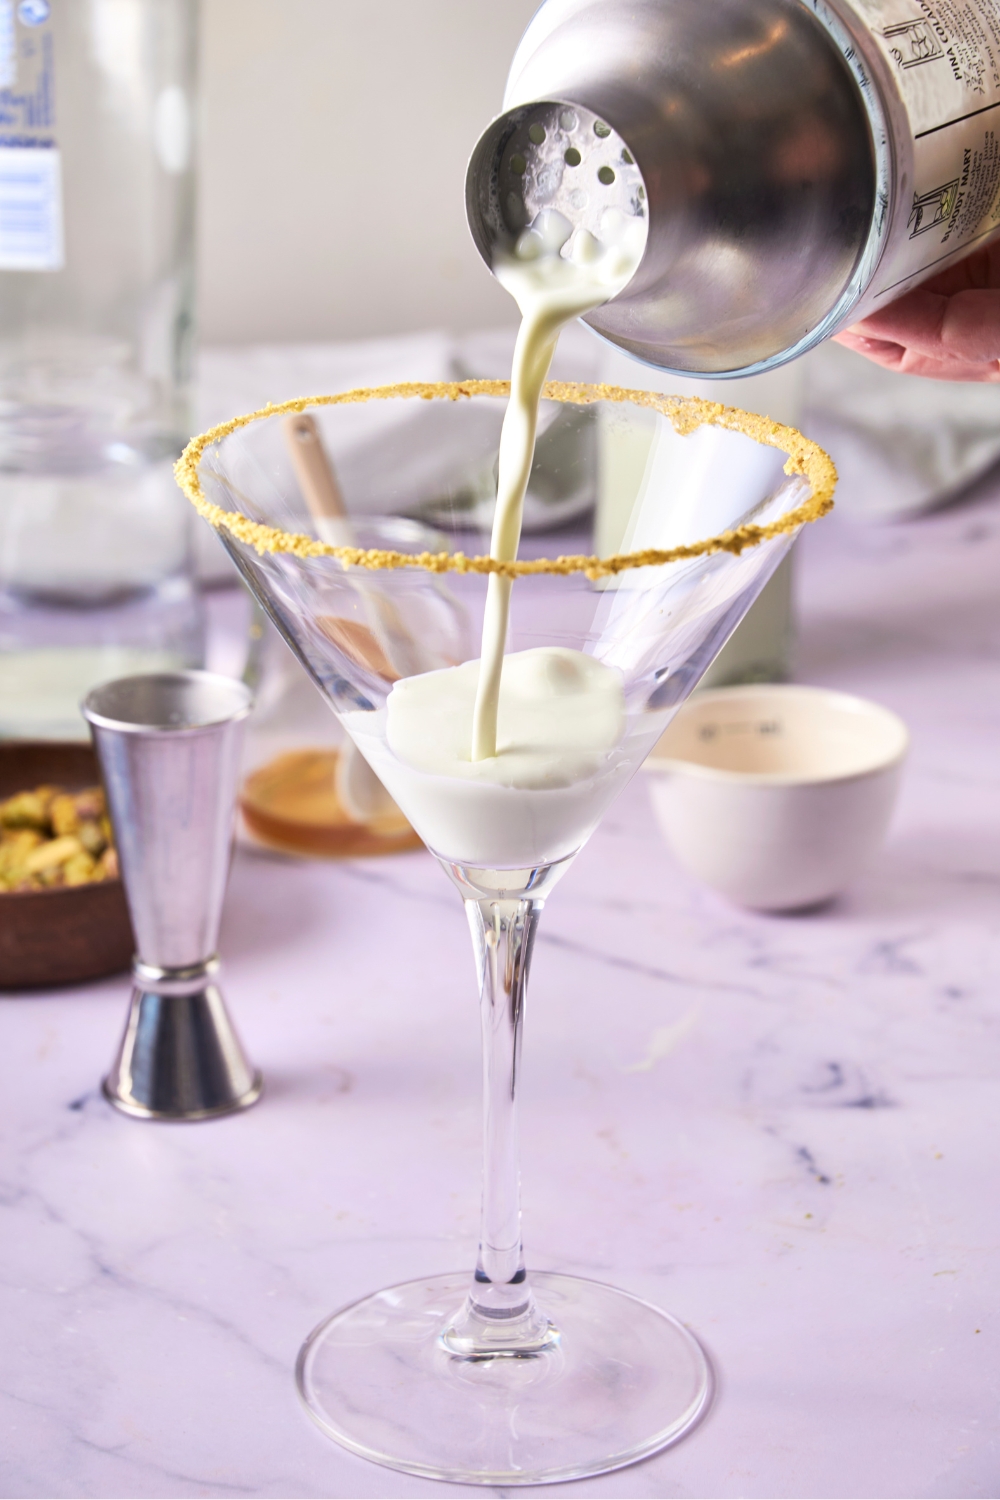 A martini glassed rimmed with crushed pistachios being filled by the cocktail shaker.